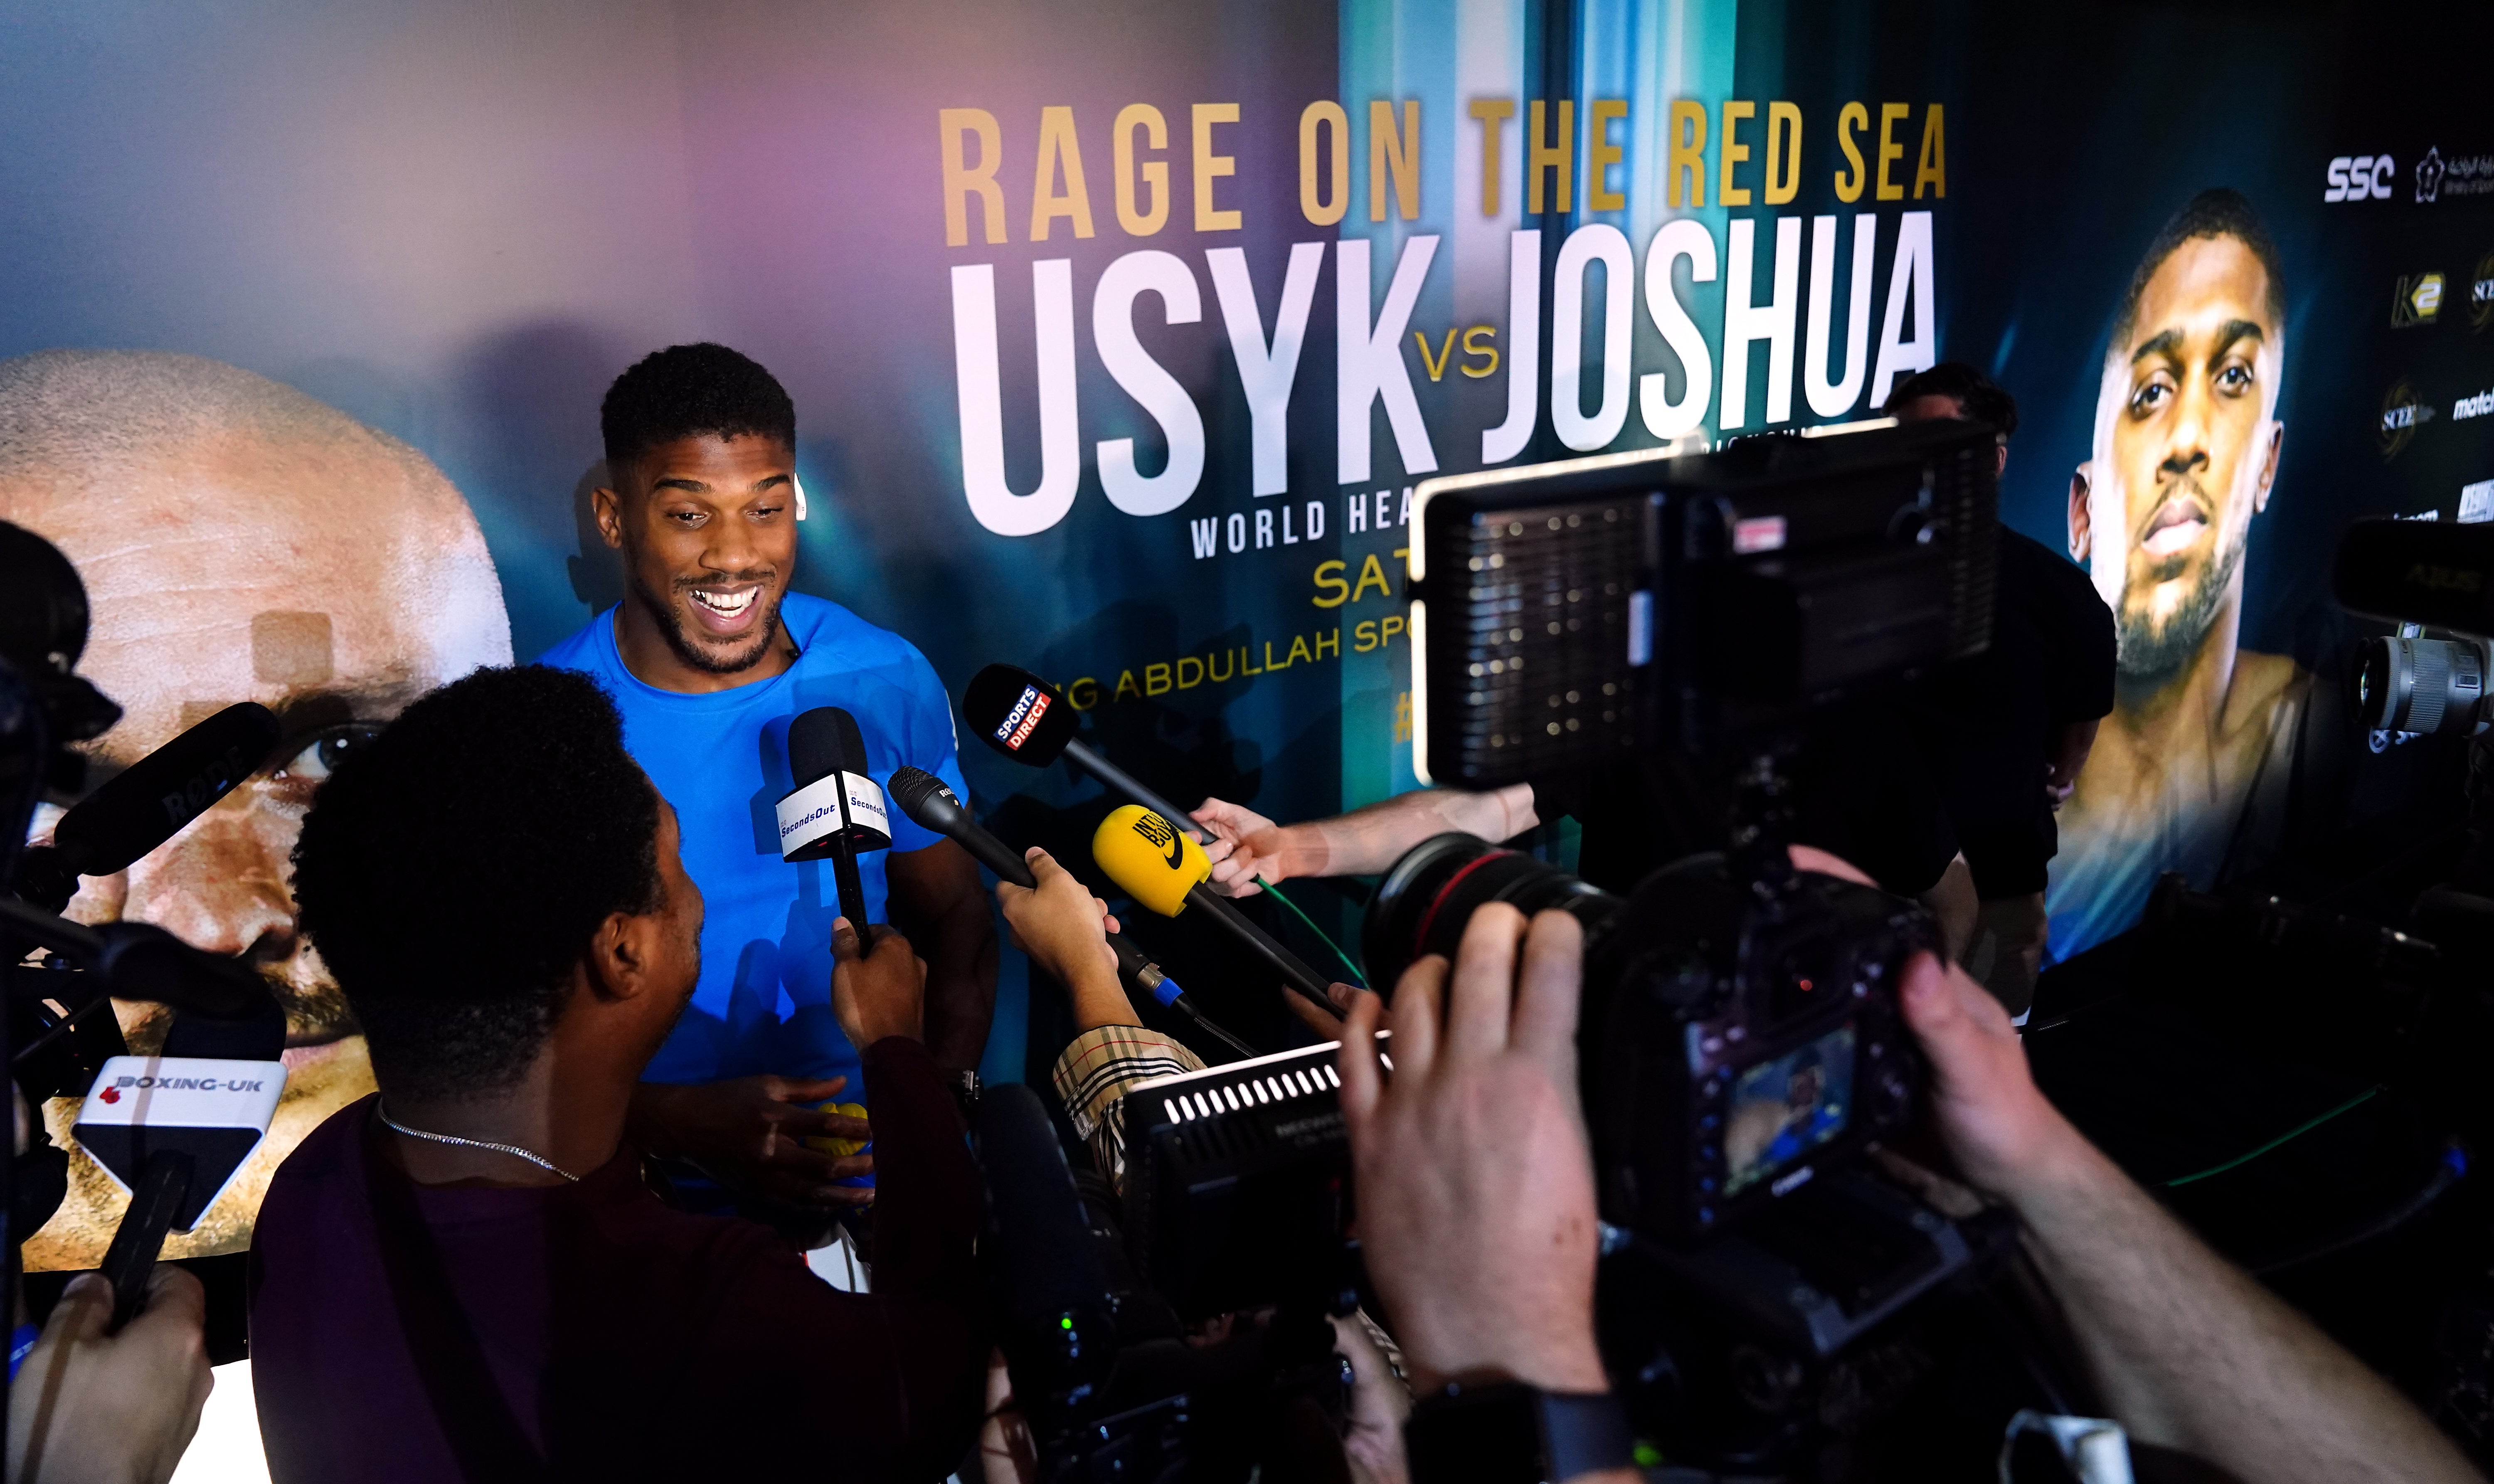 Anthony Joshua has faced questions about his future should he lose to Oleksandr Usyk